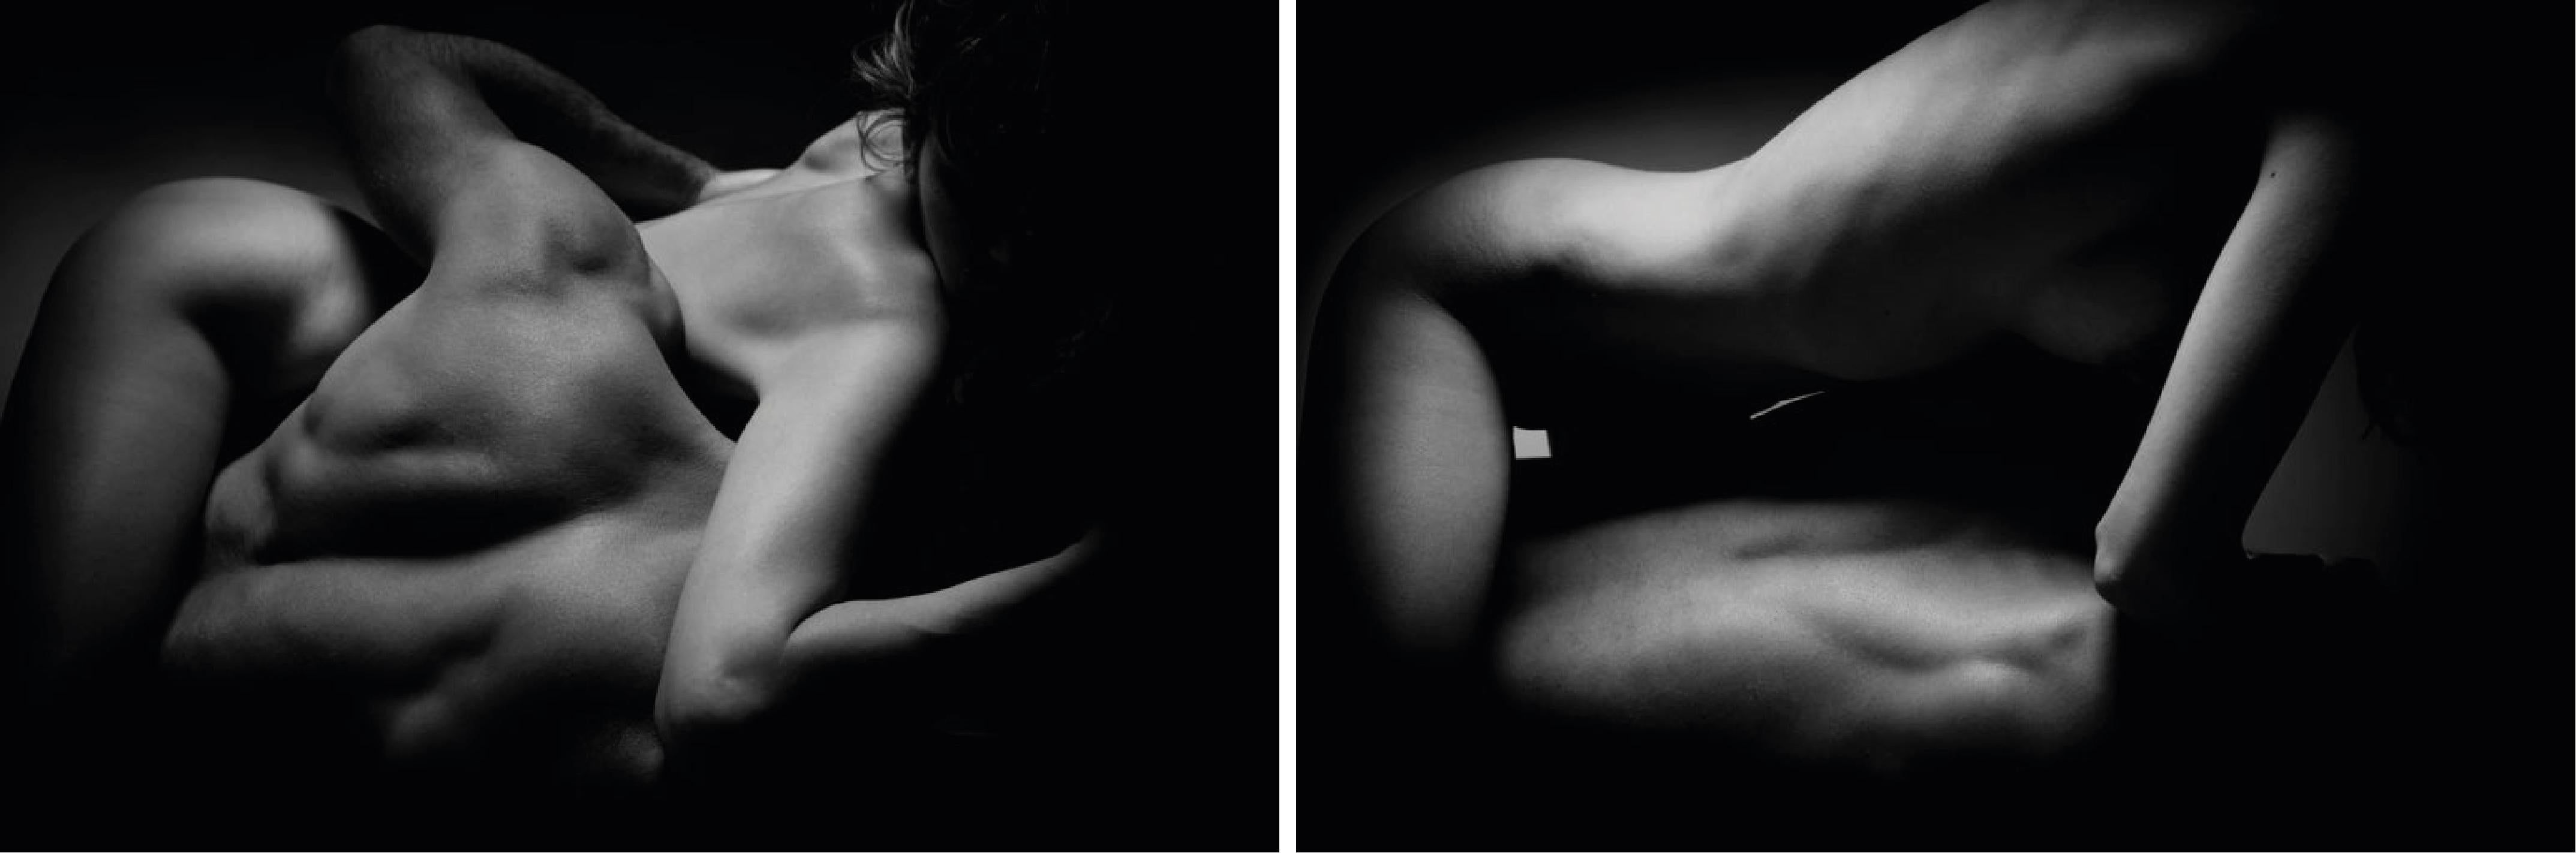 Untitled Set. From the "Serendipia" Series. Figurative nude B&W photograph